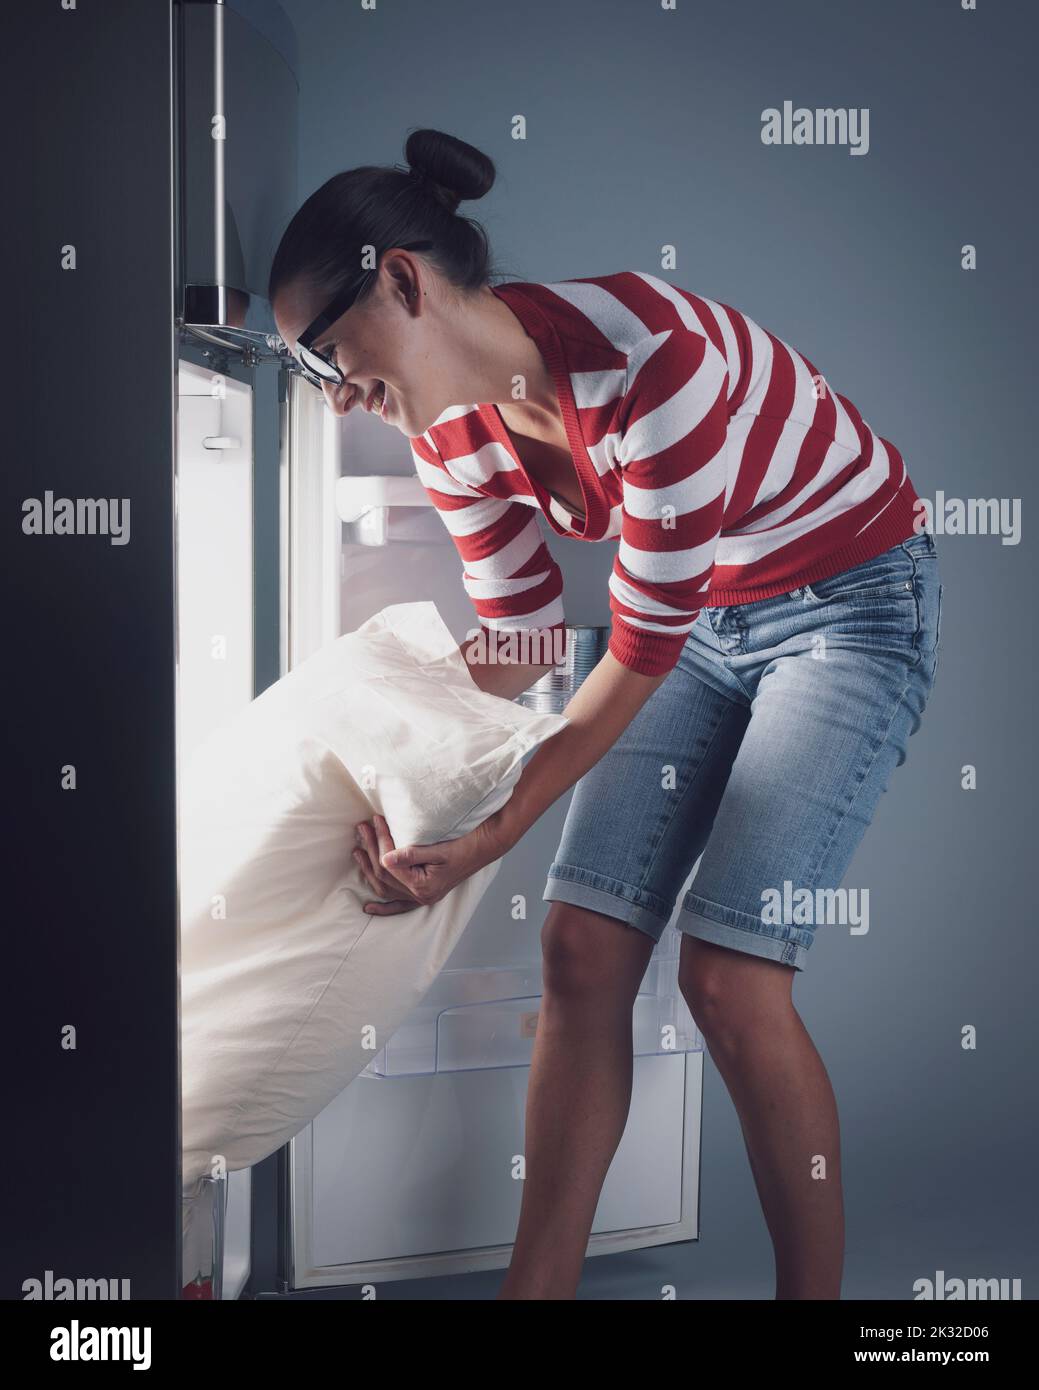 https://c8.alamy.com/comp/2K32D06/happy-woman-putting-her-bed-pillow-in-the-fridge-hot-weather-and-heatwave-concept-2K32D06.jpg